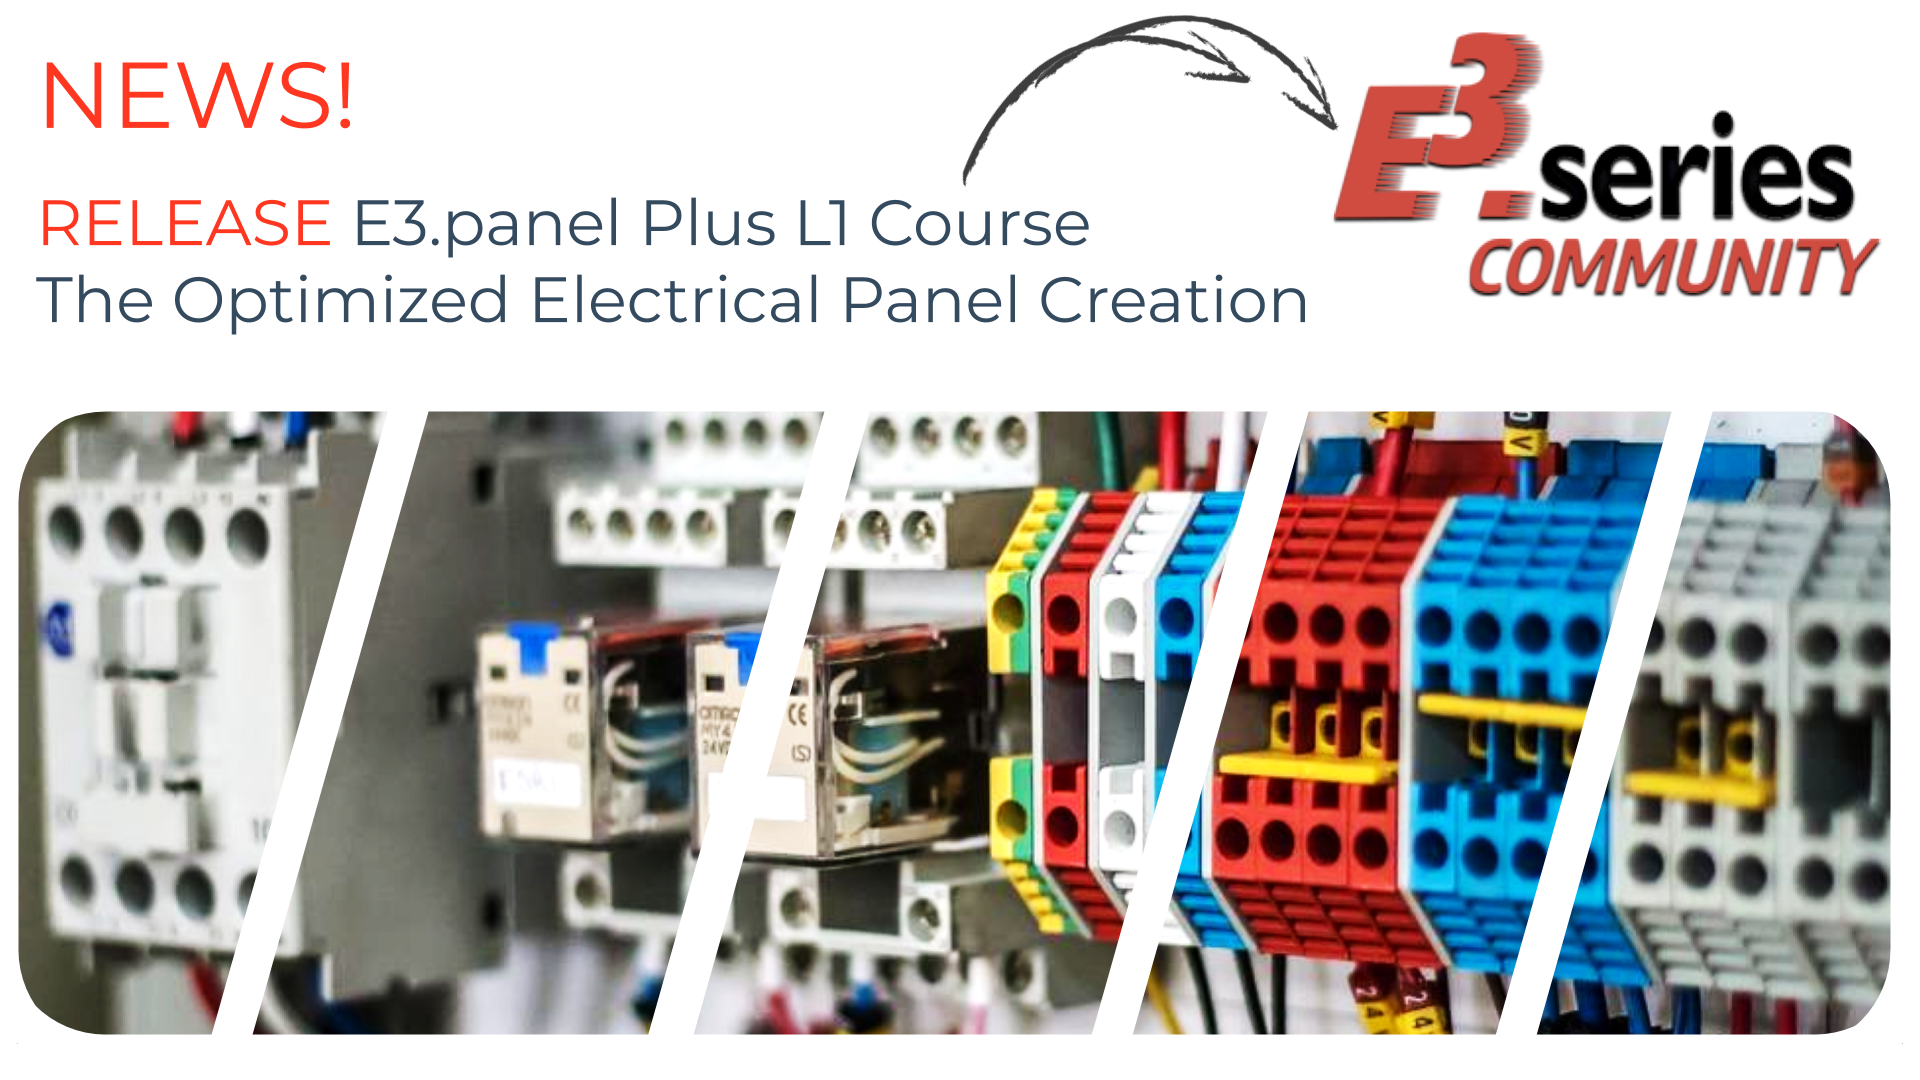 New Course  Plus L1 - The Optimized Creation of Electrical Panels